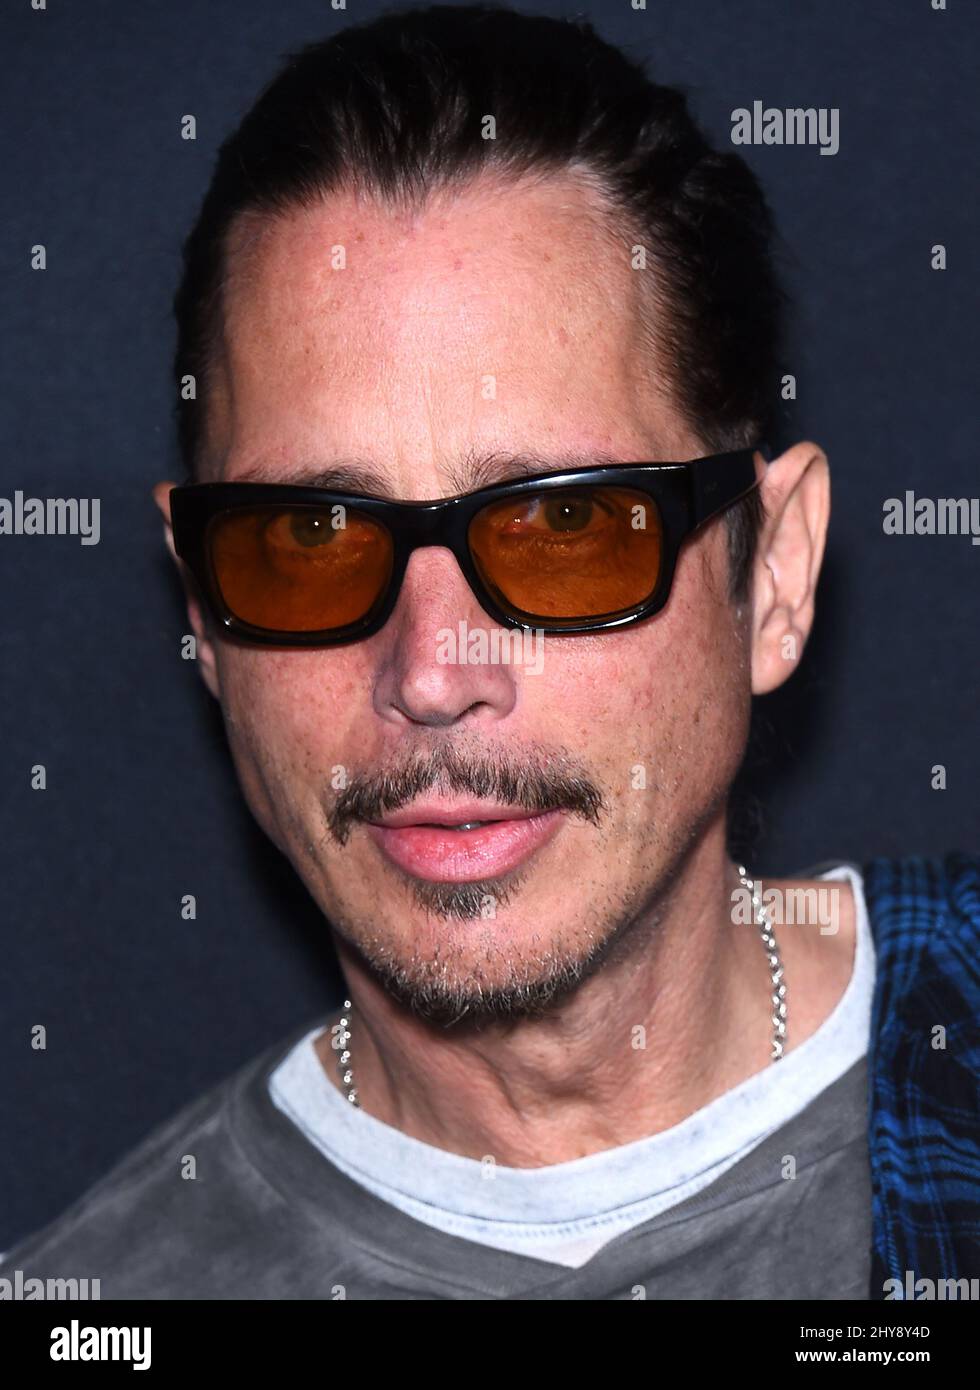 Chris Cornell attending the Saint Laurent event held at the Hollywood Palladium in Los Angeles, California. Stock Photo